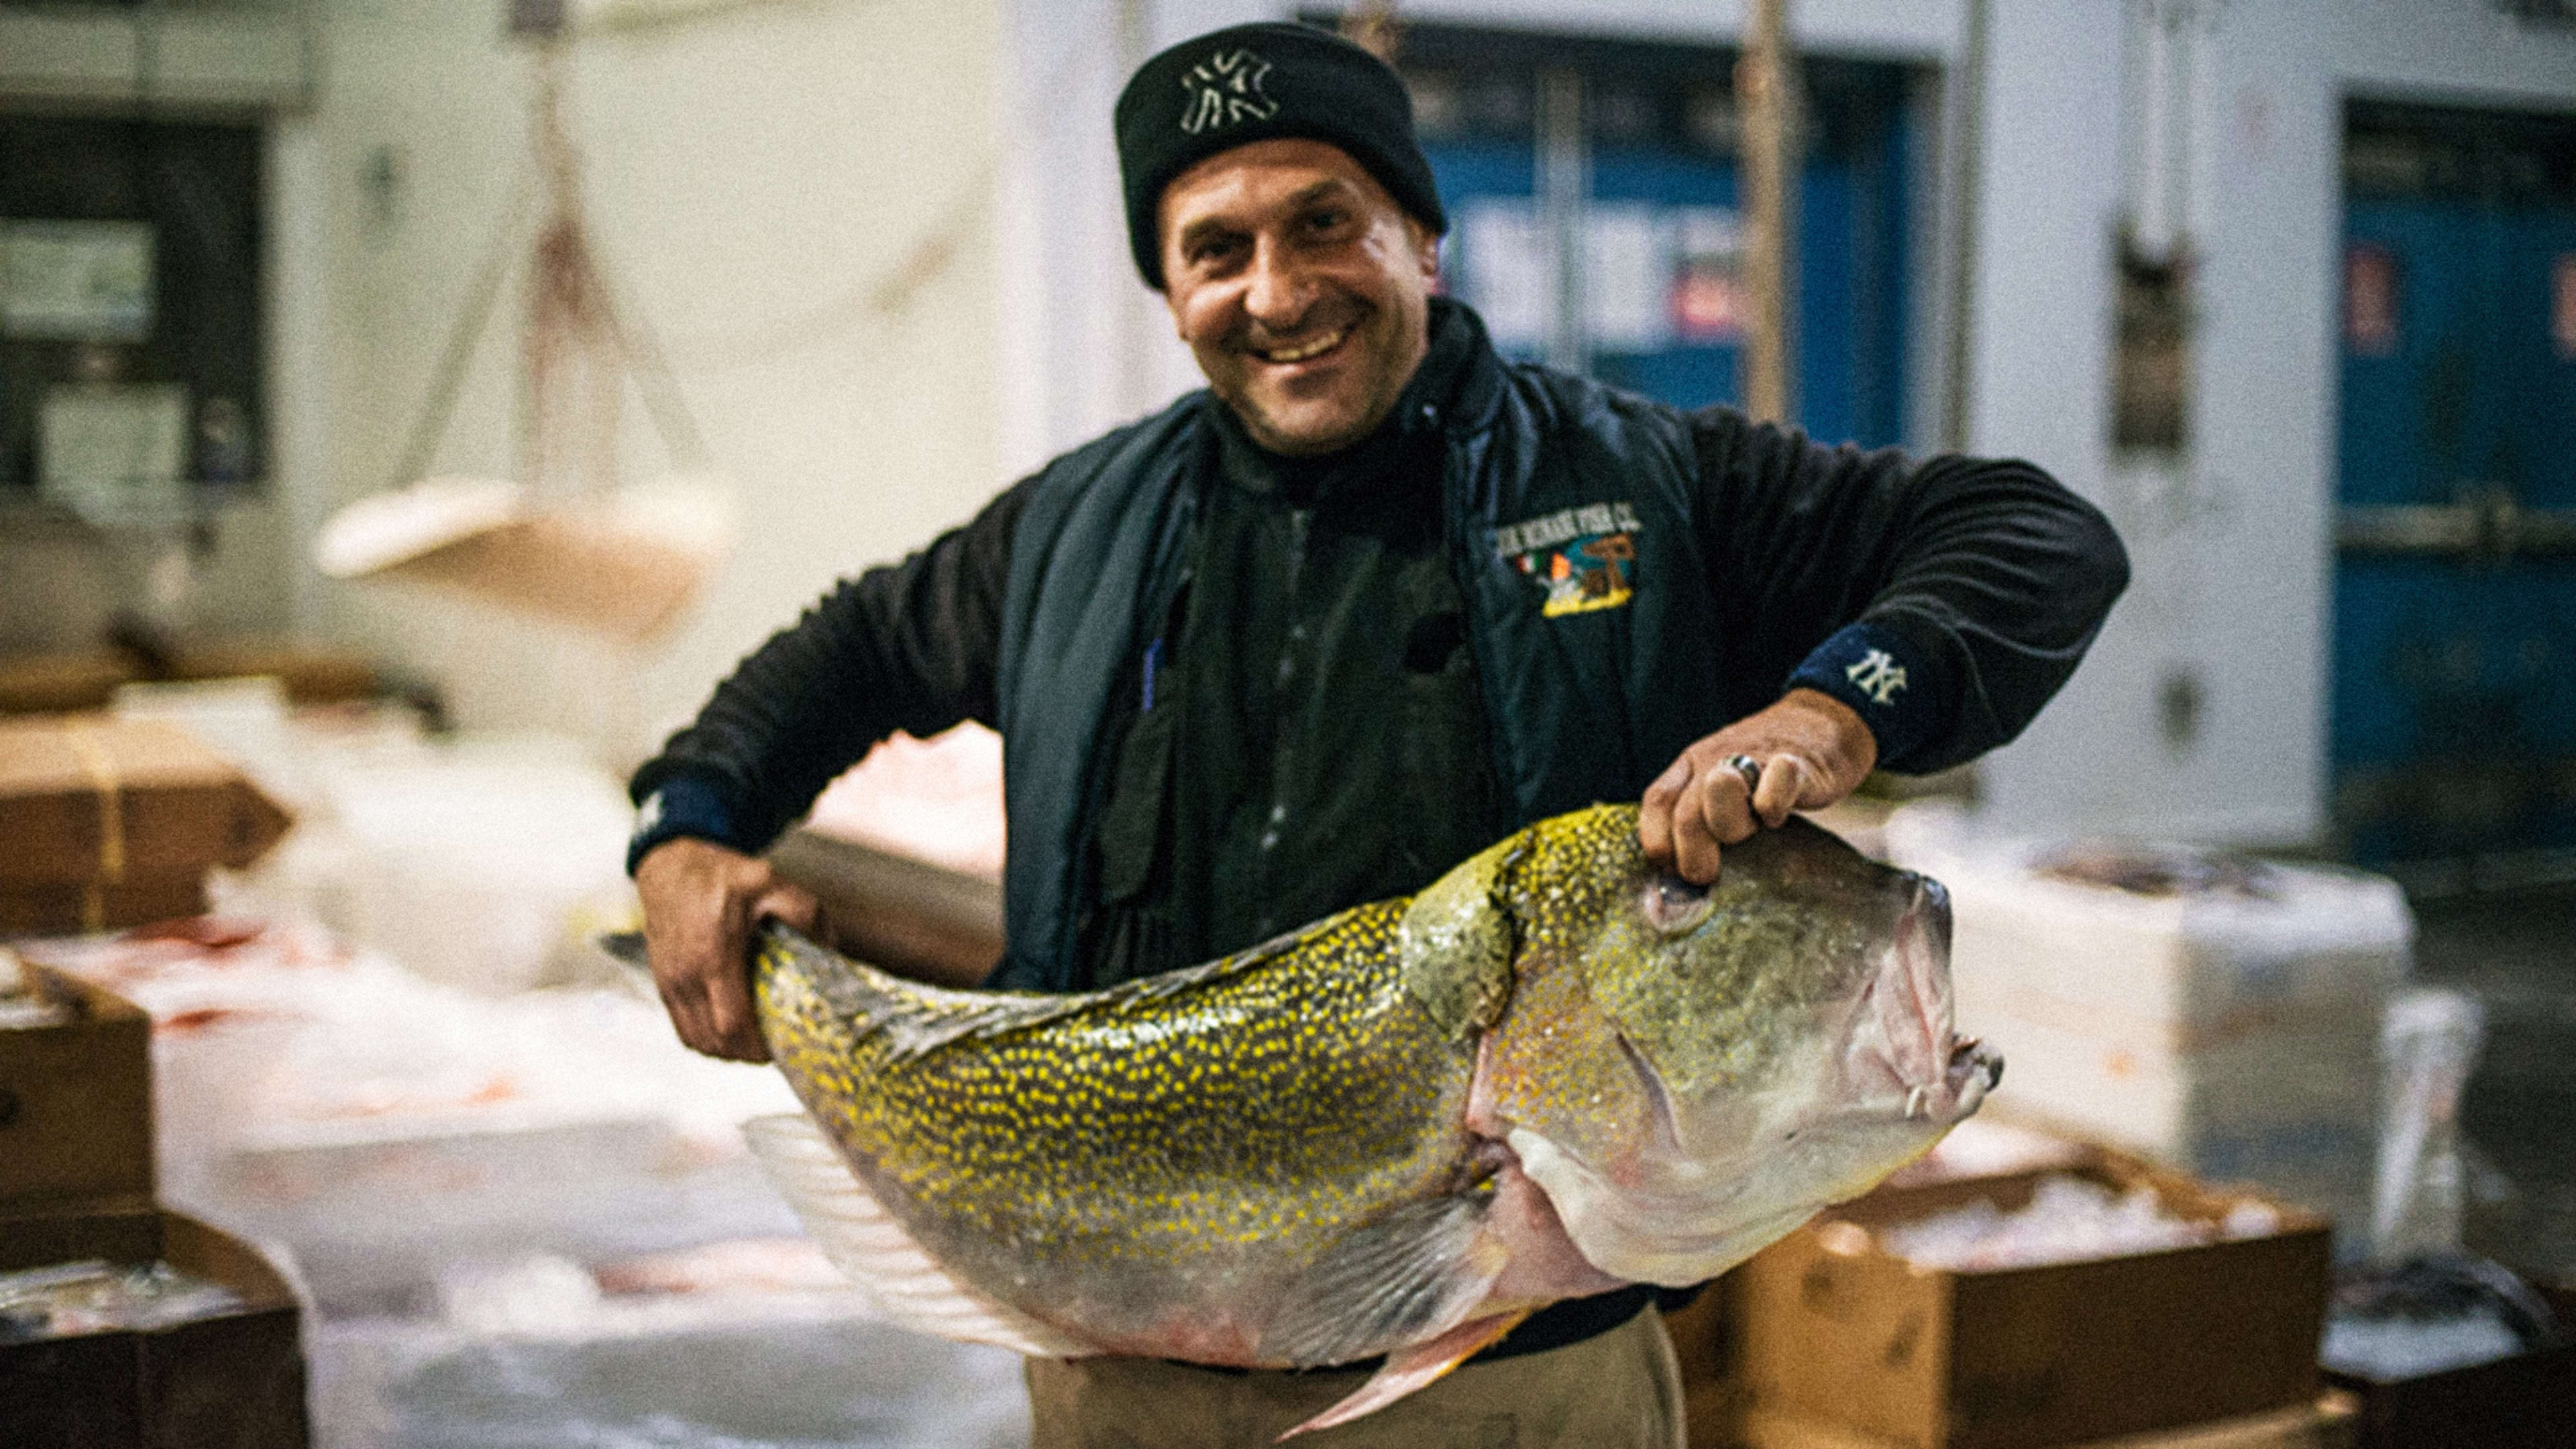 The “Amazon Of Fish” Wants To Get Americans Eating More Seafood